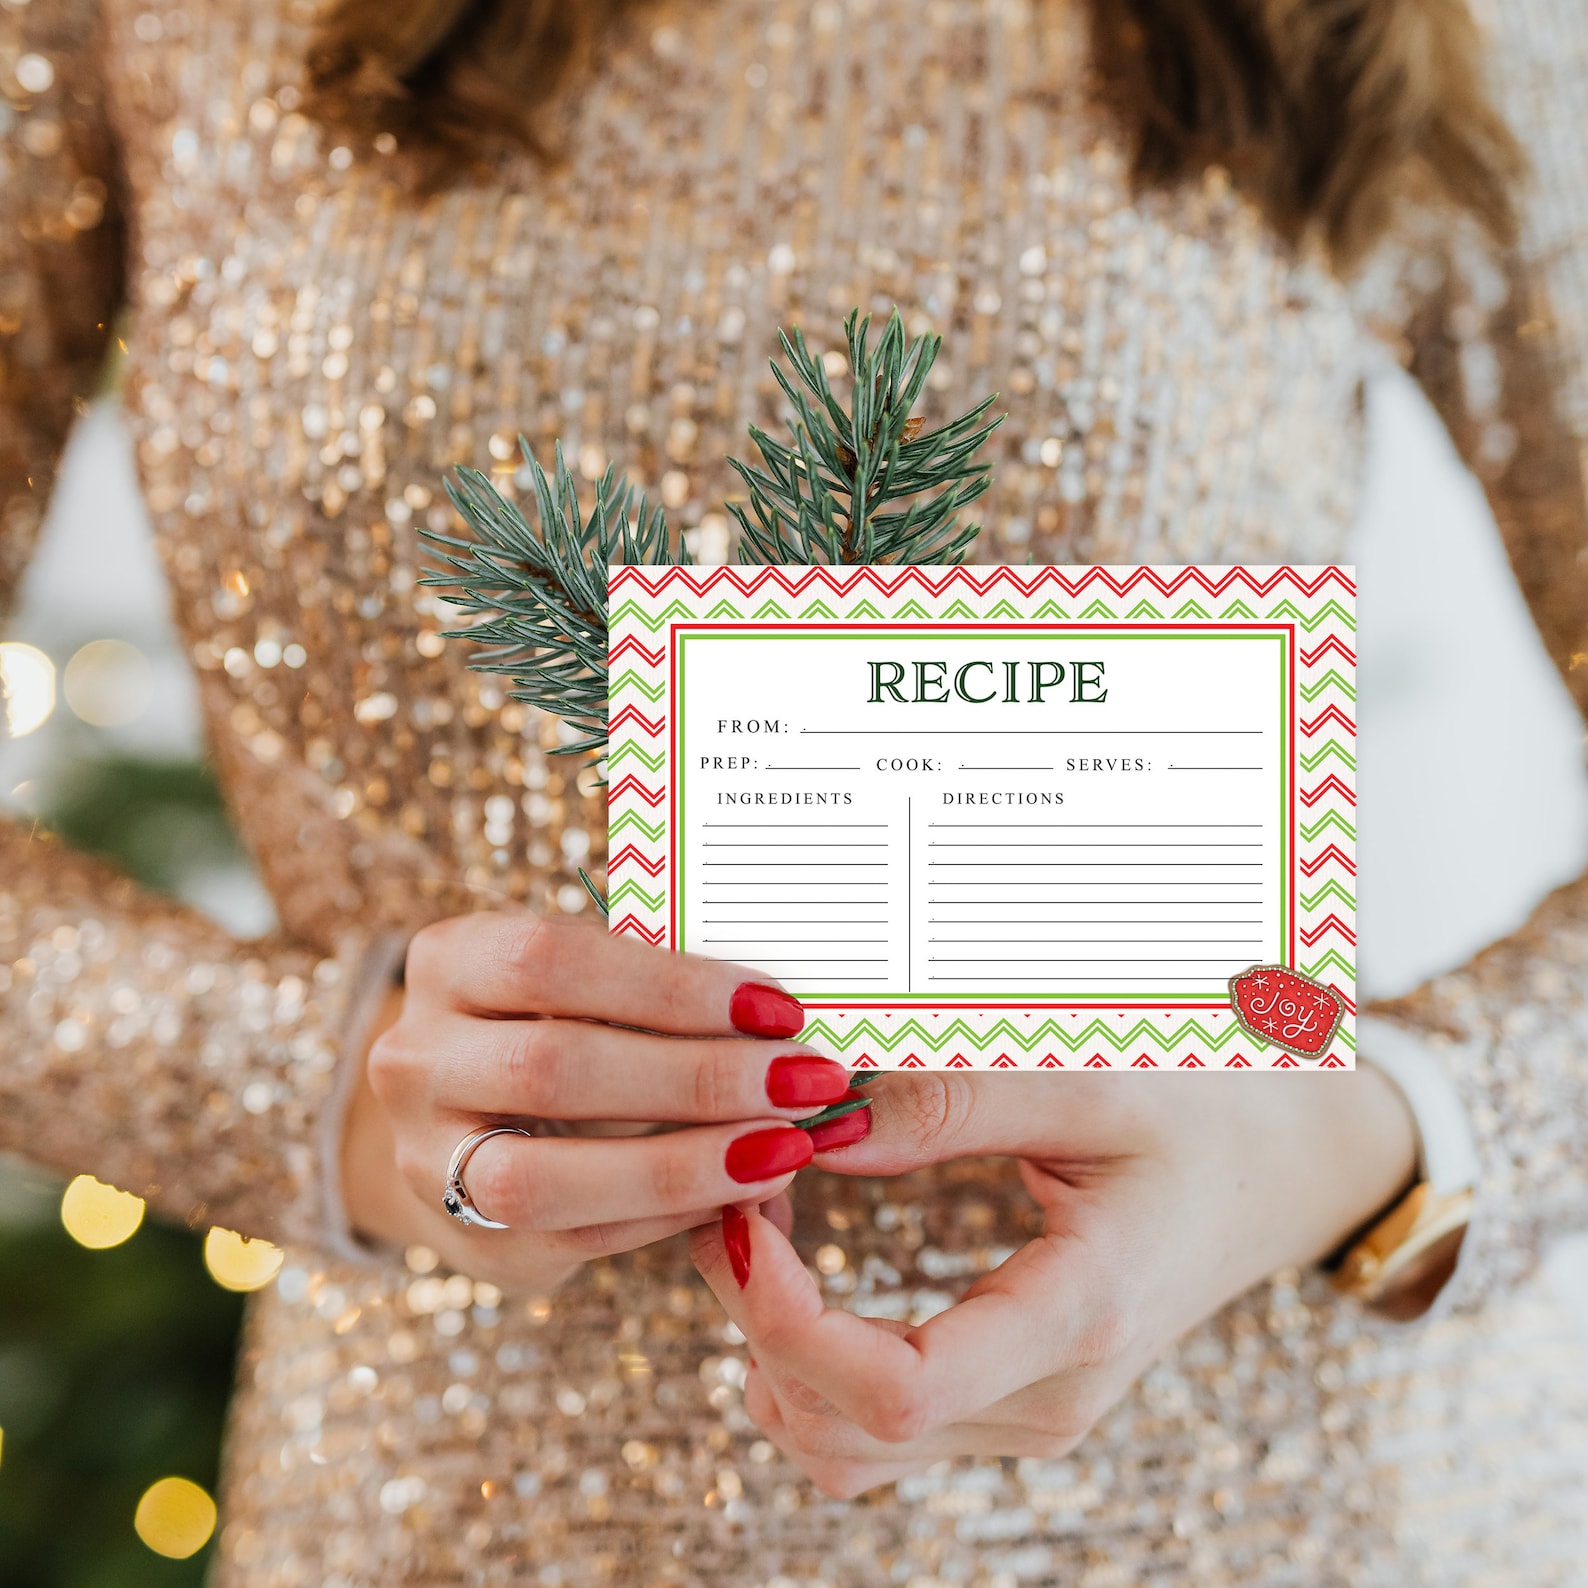 6-best-images-of-recipe-card-printable-christmas-themed-free